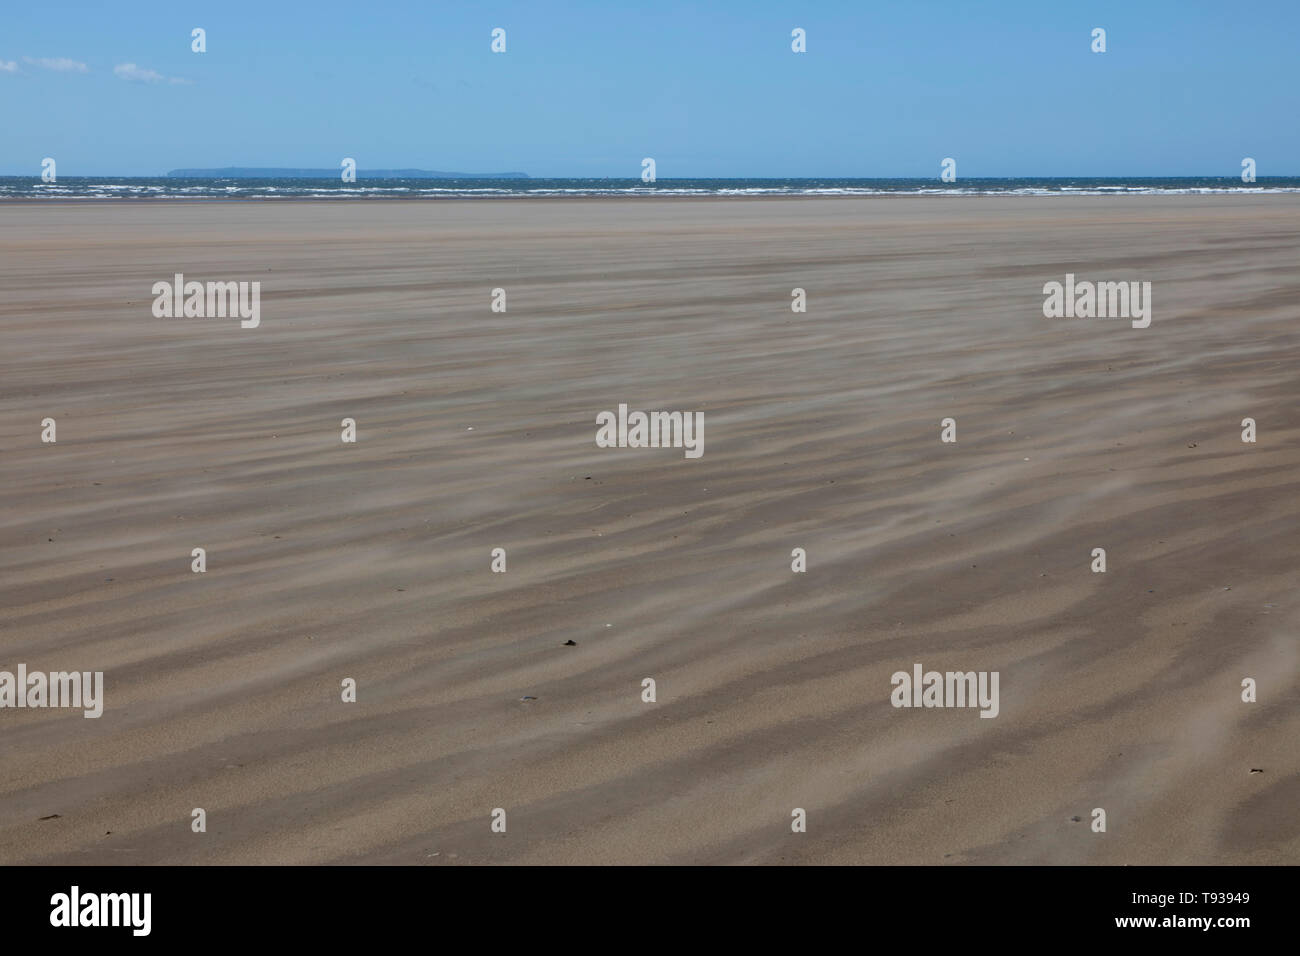 Saunton Sands, Devon, England, UK. Island of Lundy can be seen in the distance. Stock Photo